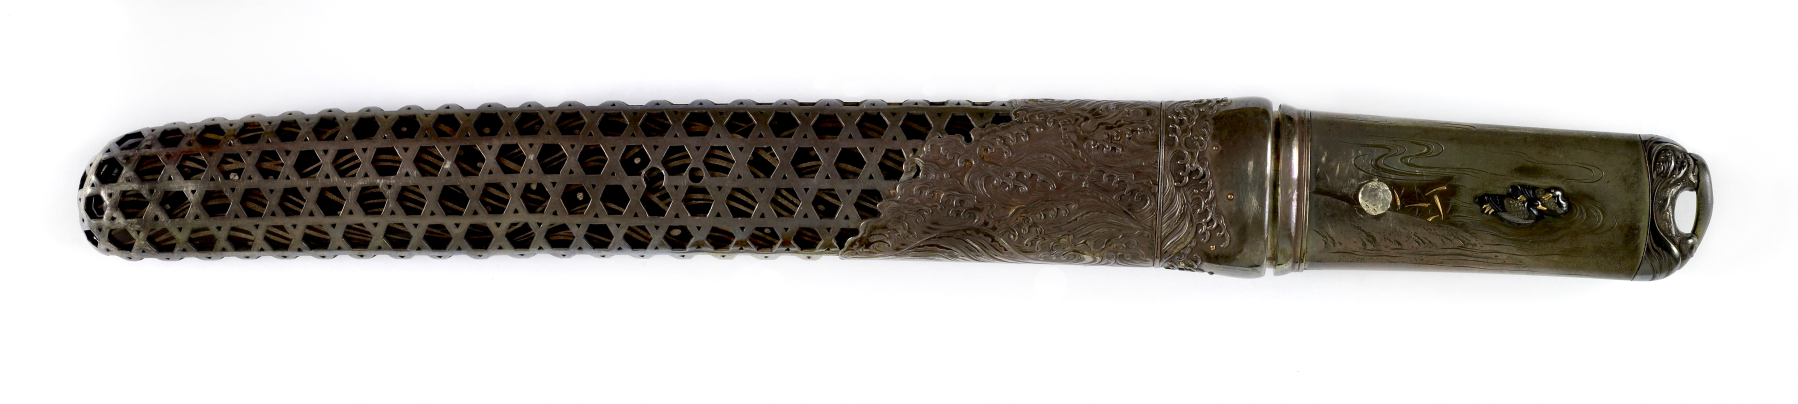 Image for Dagger (aikuchi) with black lacquer saya covered with silver basket weave over gold waves (includes 51.1283.1-51.1283.4)